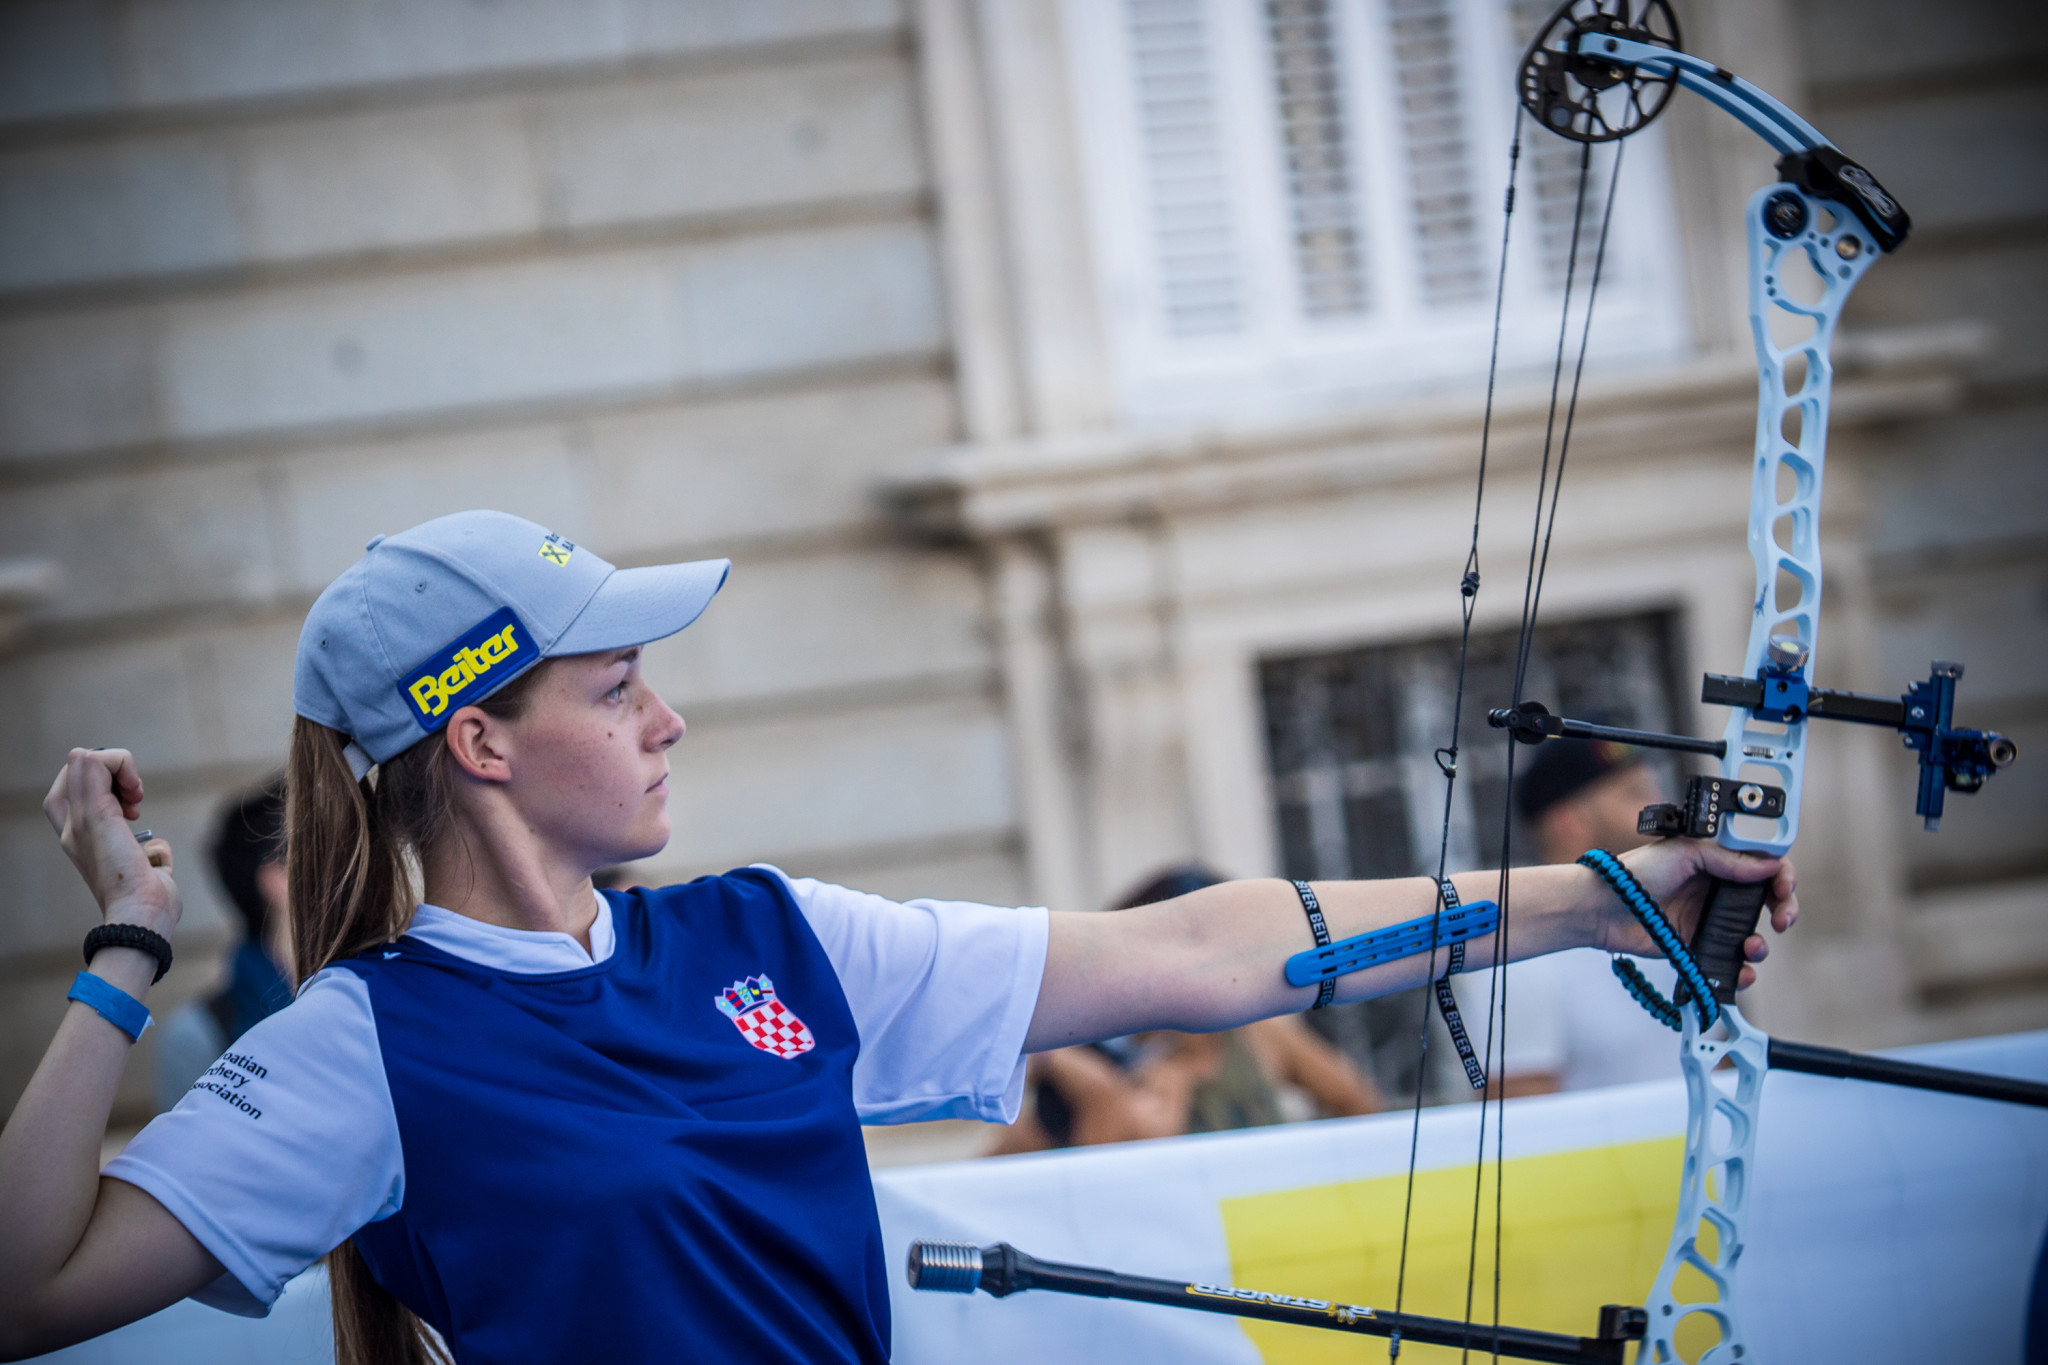 Amanda Mlinaric has averaged a score of 9.6 out of 10 per arrow over the last two years in outdoor archery competitions at 50 metres ©Getty Images